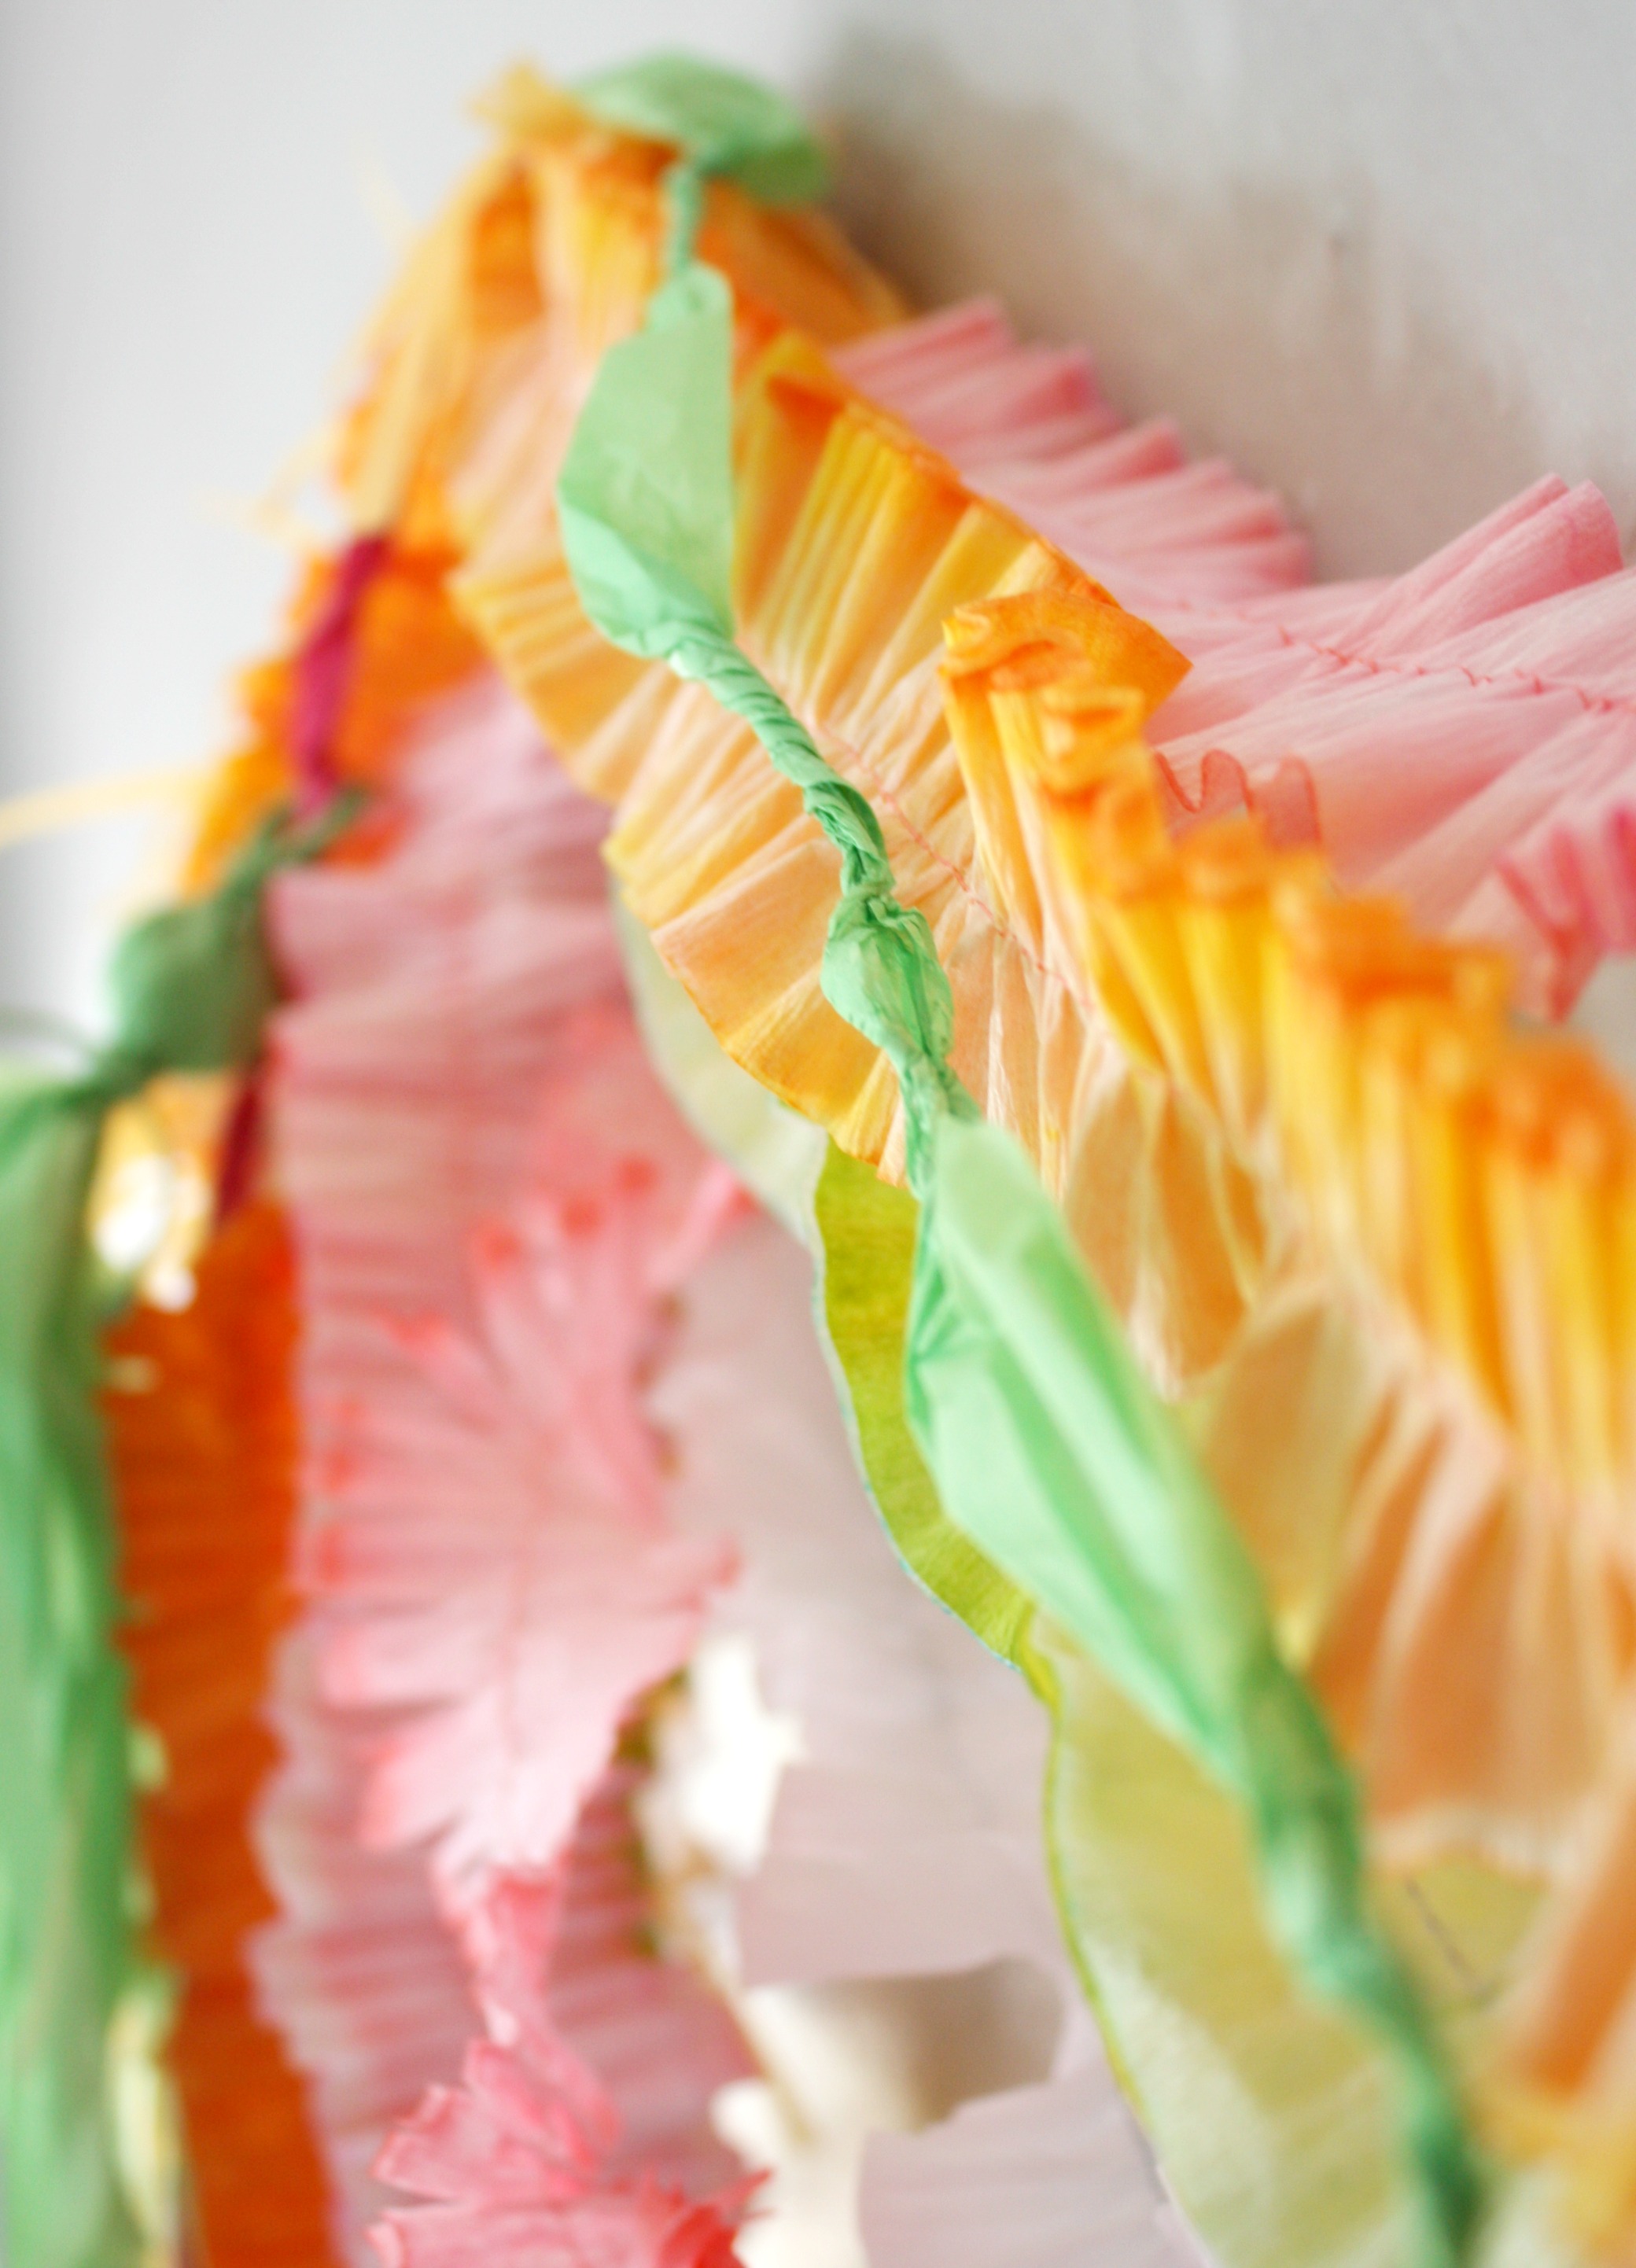 Crepe and tissue paper decoration detail